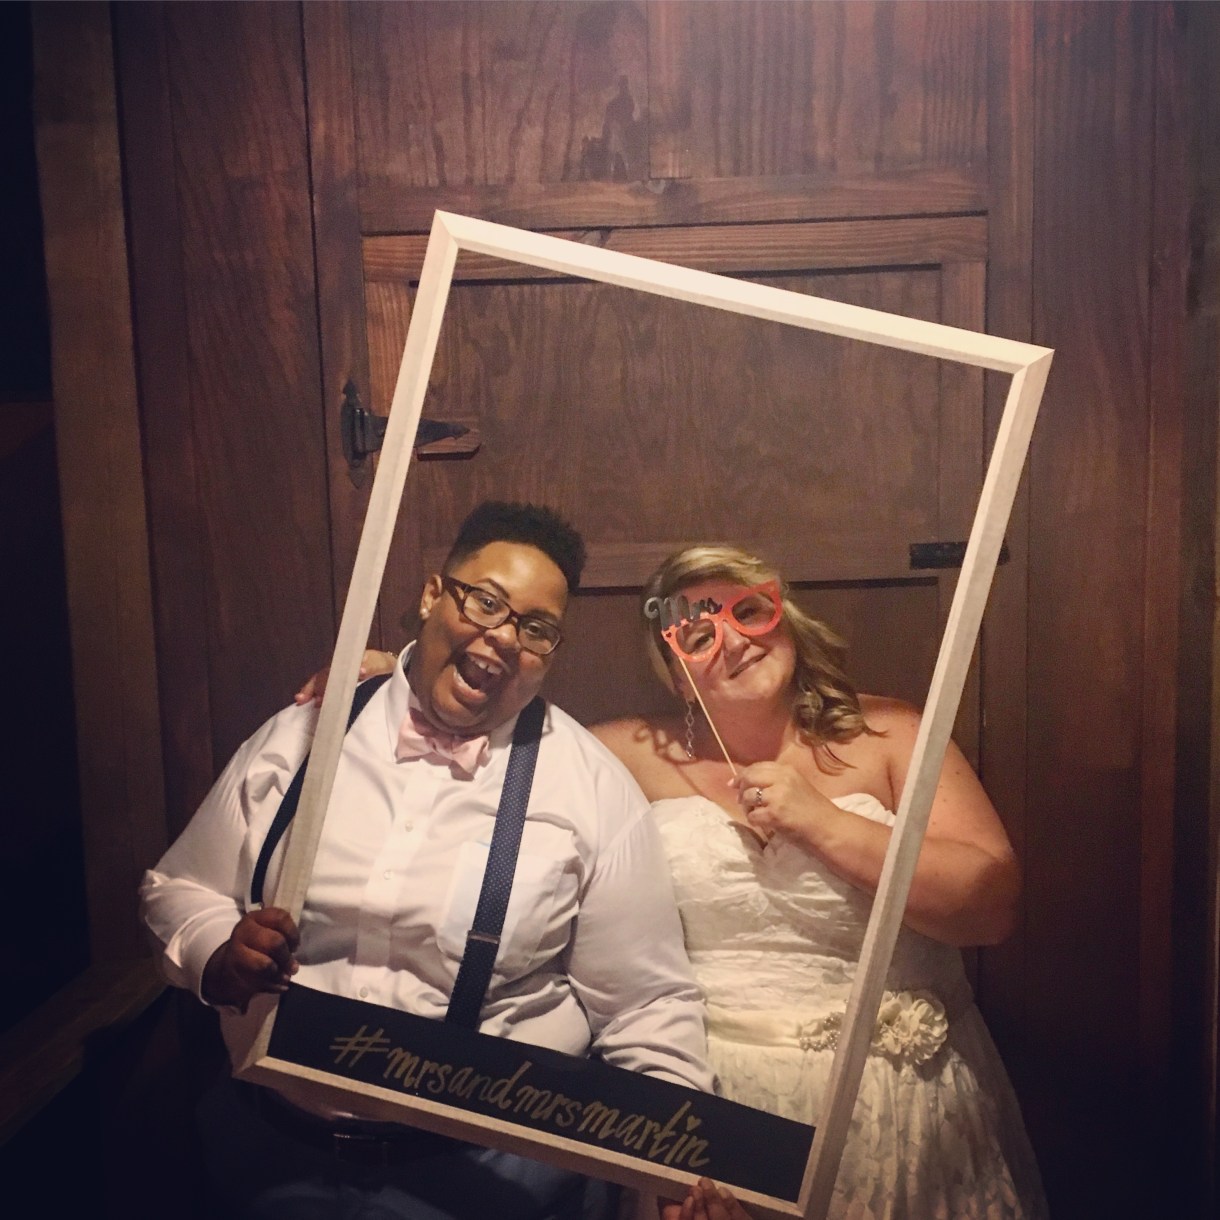 a wedding photo of shea and Jane. shea is wearing a white shirt, pink bowtie, suspenders, glasses, navy pants and a huge smile. Jane is wearing a gorgeous lacy wedding dress and is holding up glasses that are the type for photo props. shea is holding up a polaroid esque wooden frame with #mrsandmrsmartin written on its base. shea is a Black nonbinary human with short curly black hair and Jane is a white woman with shoulder length blonde hair that is curled and falling down to her shoulders